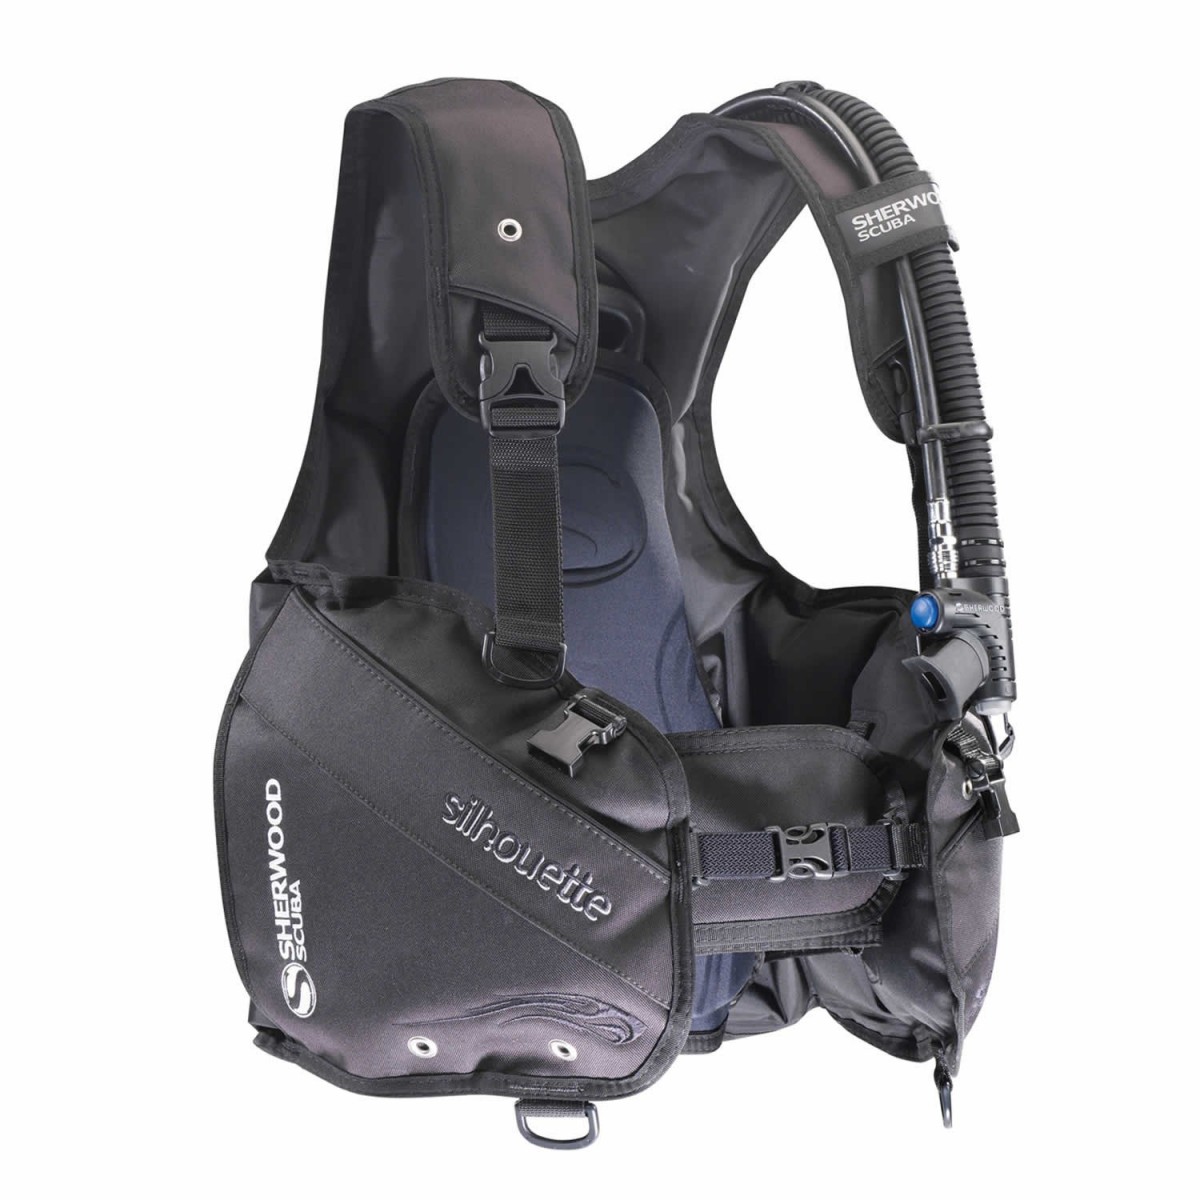 Sherwood Silhouette Scuba Diving Buoyancy Compensator Weight Integrated.